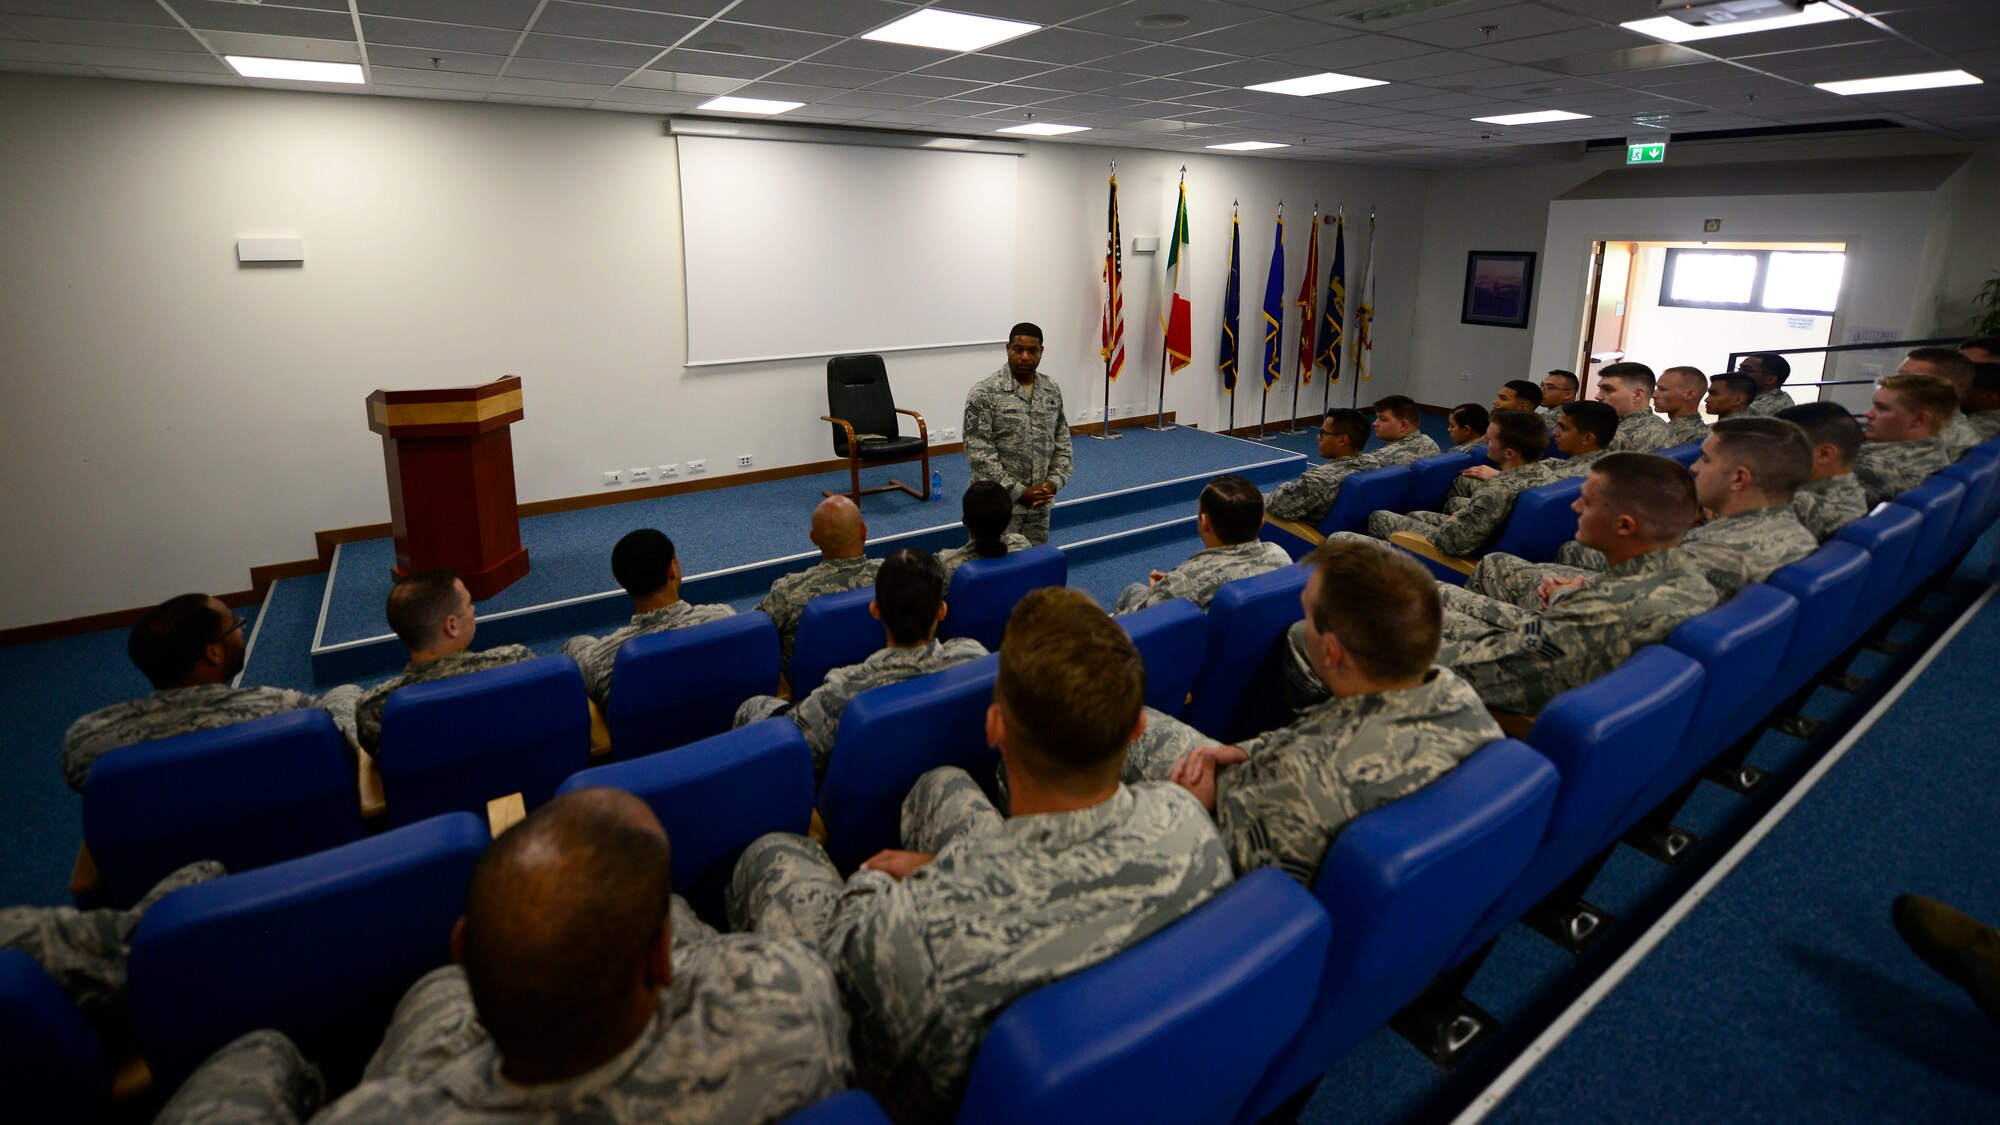 Chief Master Sgt. Phillip L. Easton, U.S. Air Forces in Europe and Air Forces Africa command chief, speaks with Airmen at Airmen Leadership School during a visit to Aviano Air Base, Italy, July 23, 2018. Easton mentioned several key words of advice to the Airmen on what it means to be a front-line supervisor in the Air Force. (U.S. Air Force photo by Staff Sgt. Cary Smith)